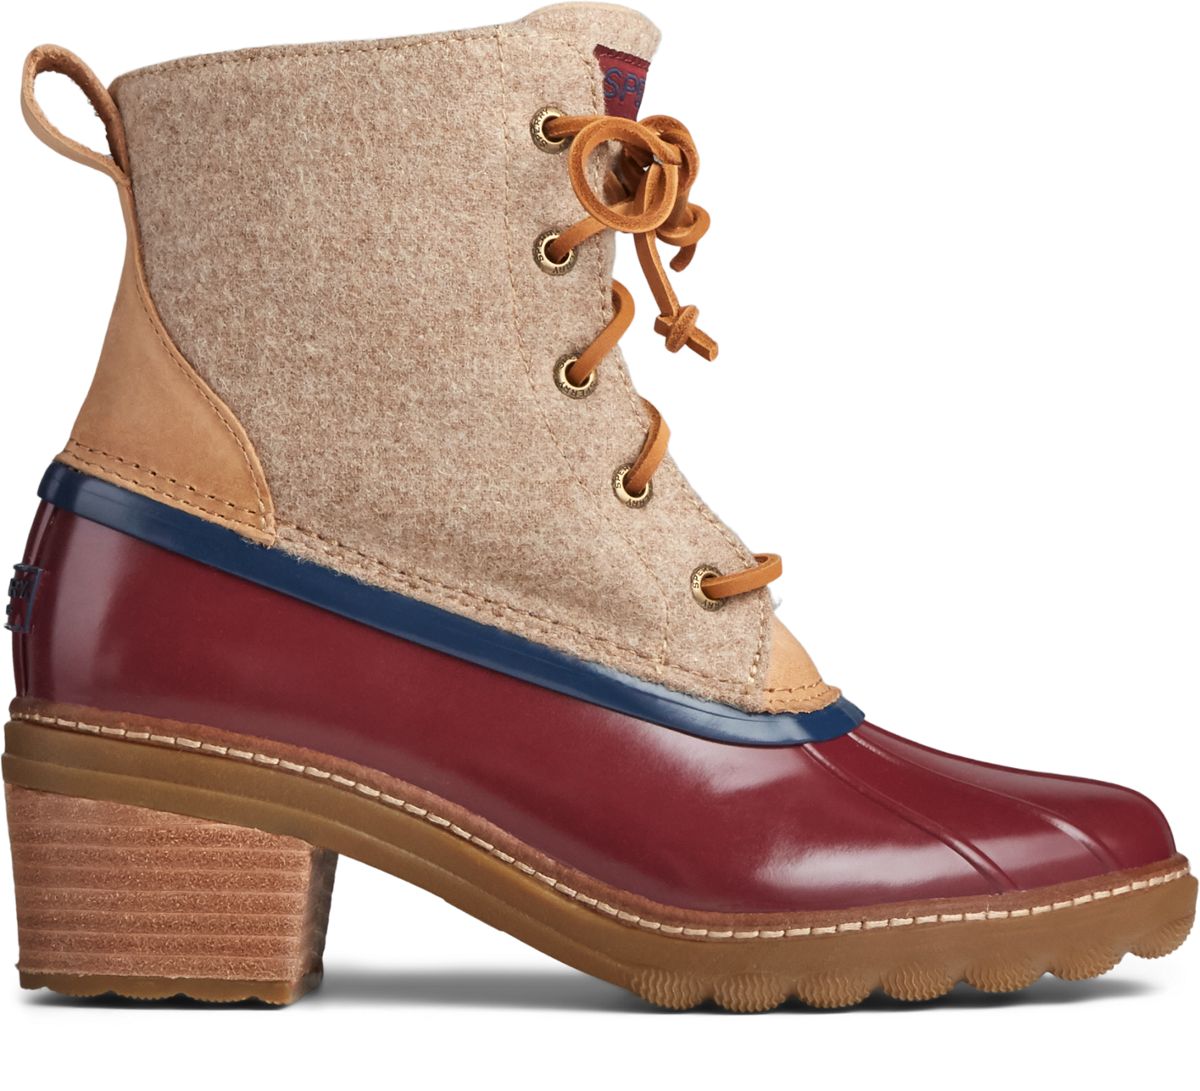 wool duck boots